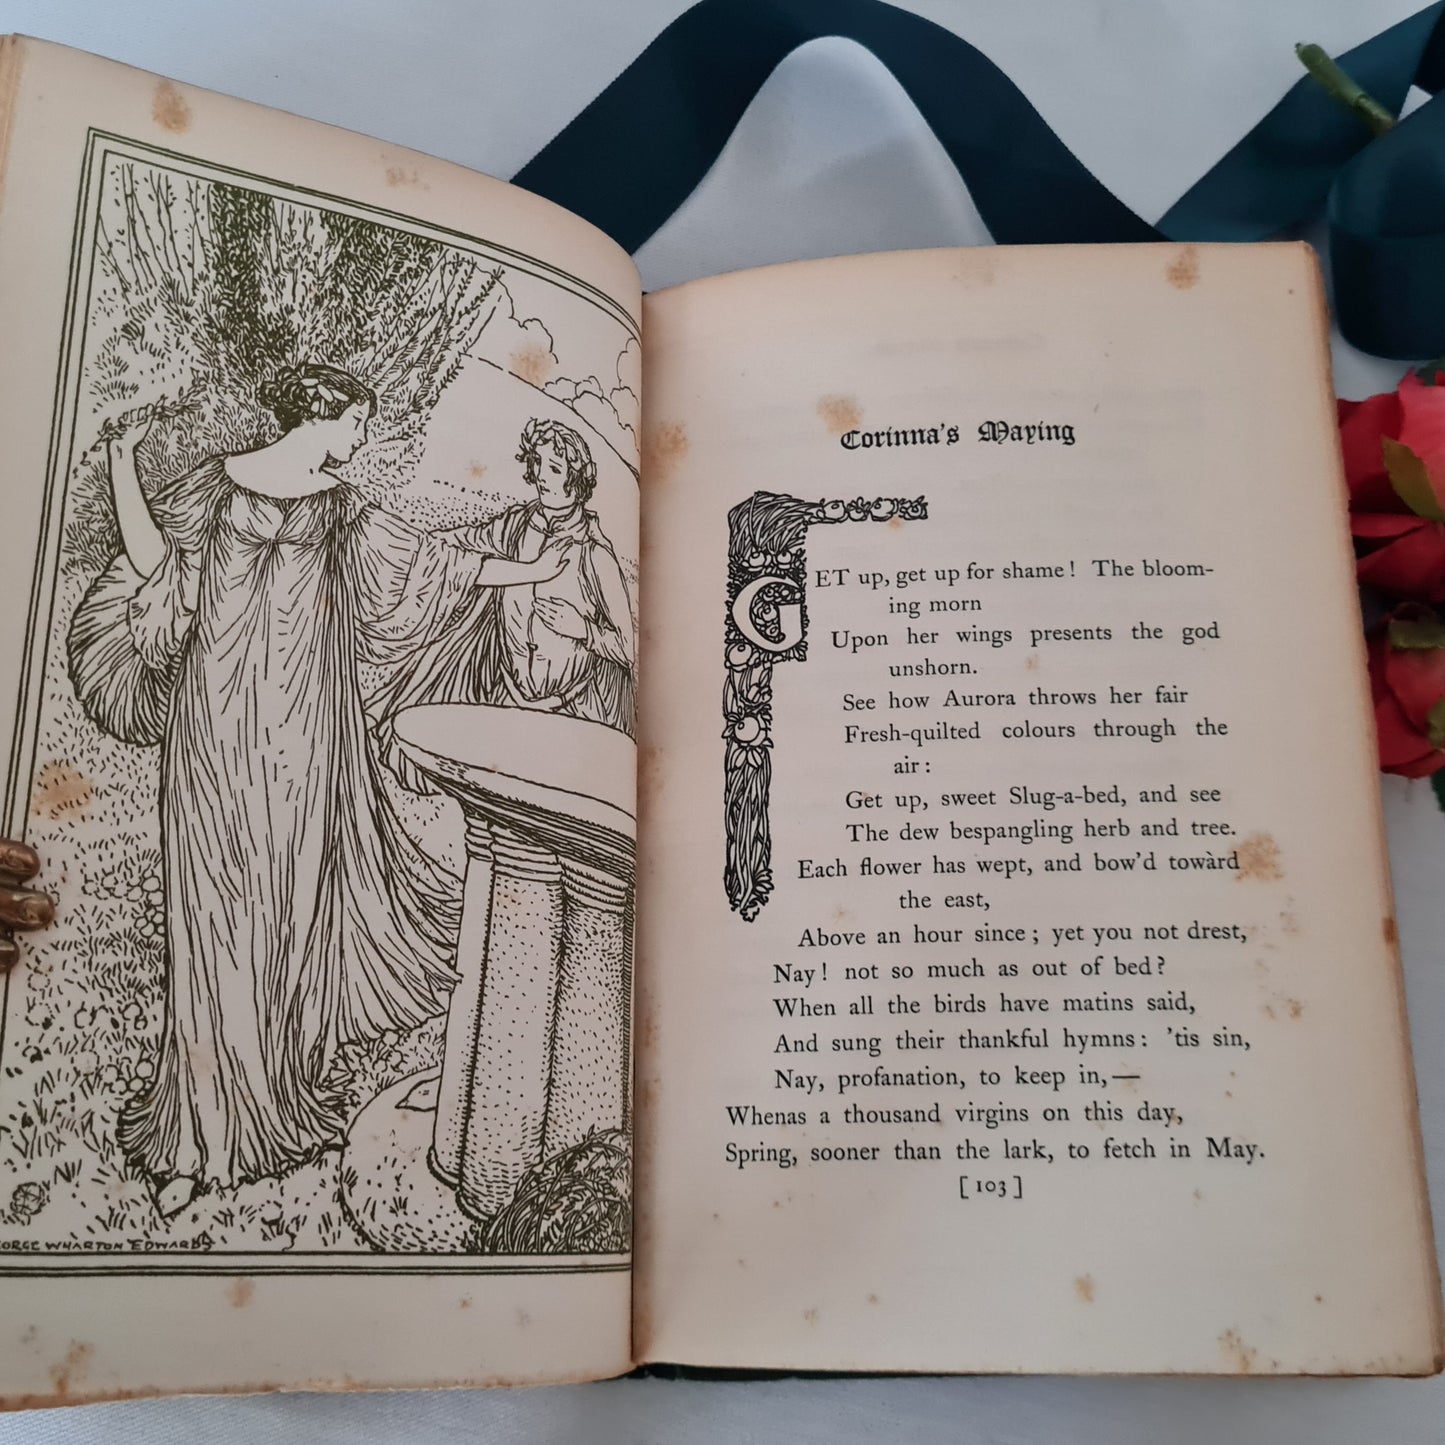 1897 A Book of Old English Love Songs / Macmillan, New York / Absolutely Beautiful Antique Book / Richly Decorated by George Wharton Edwards